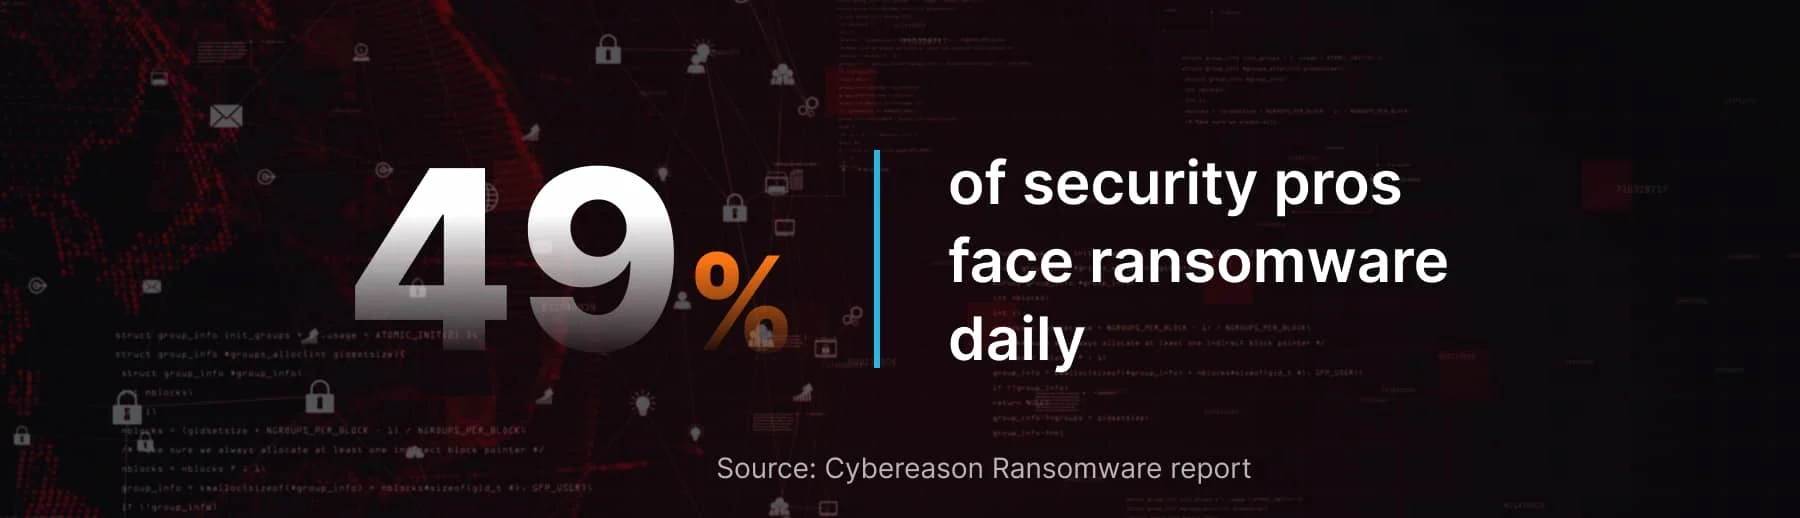 49% of security pros face ransomware daily